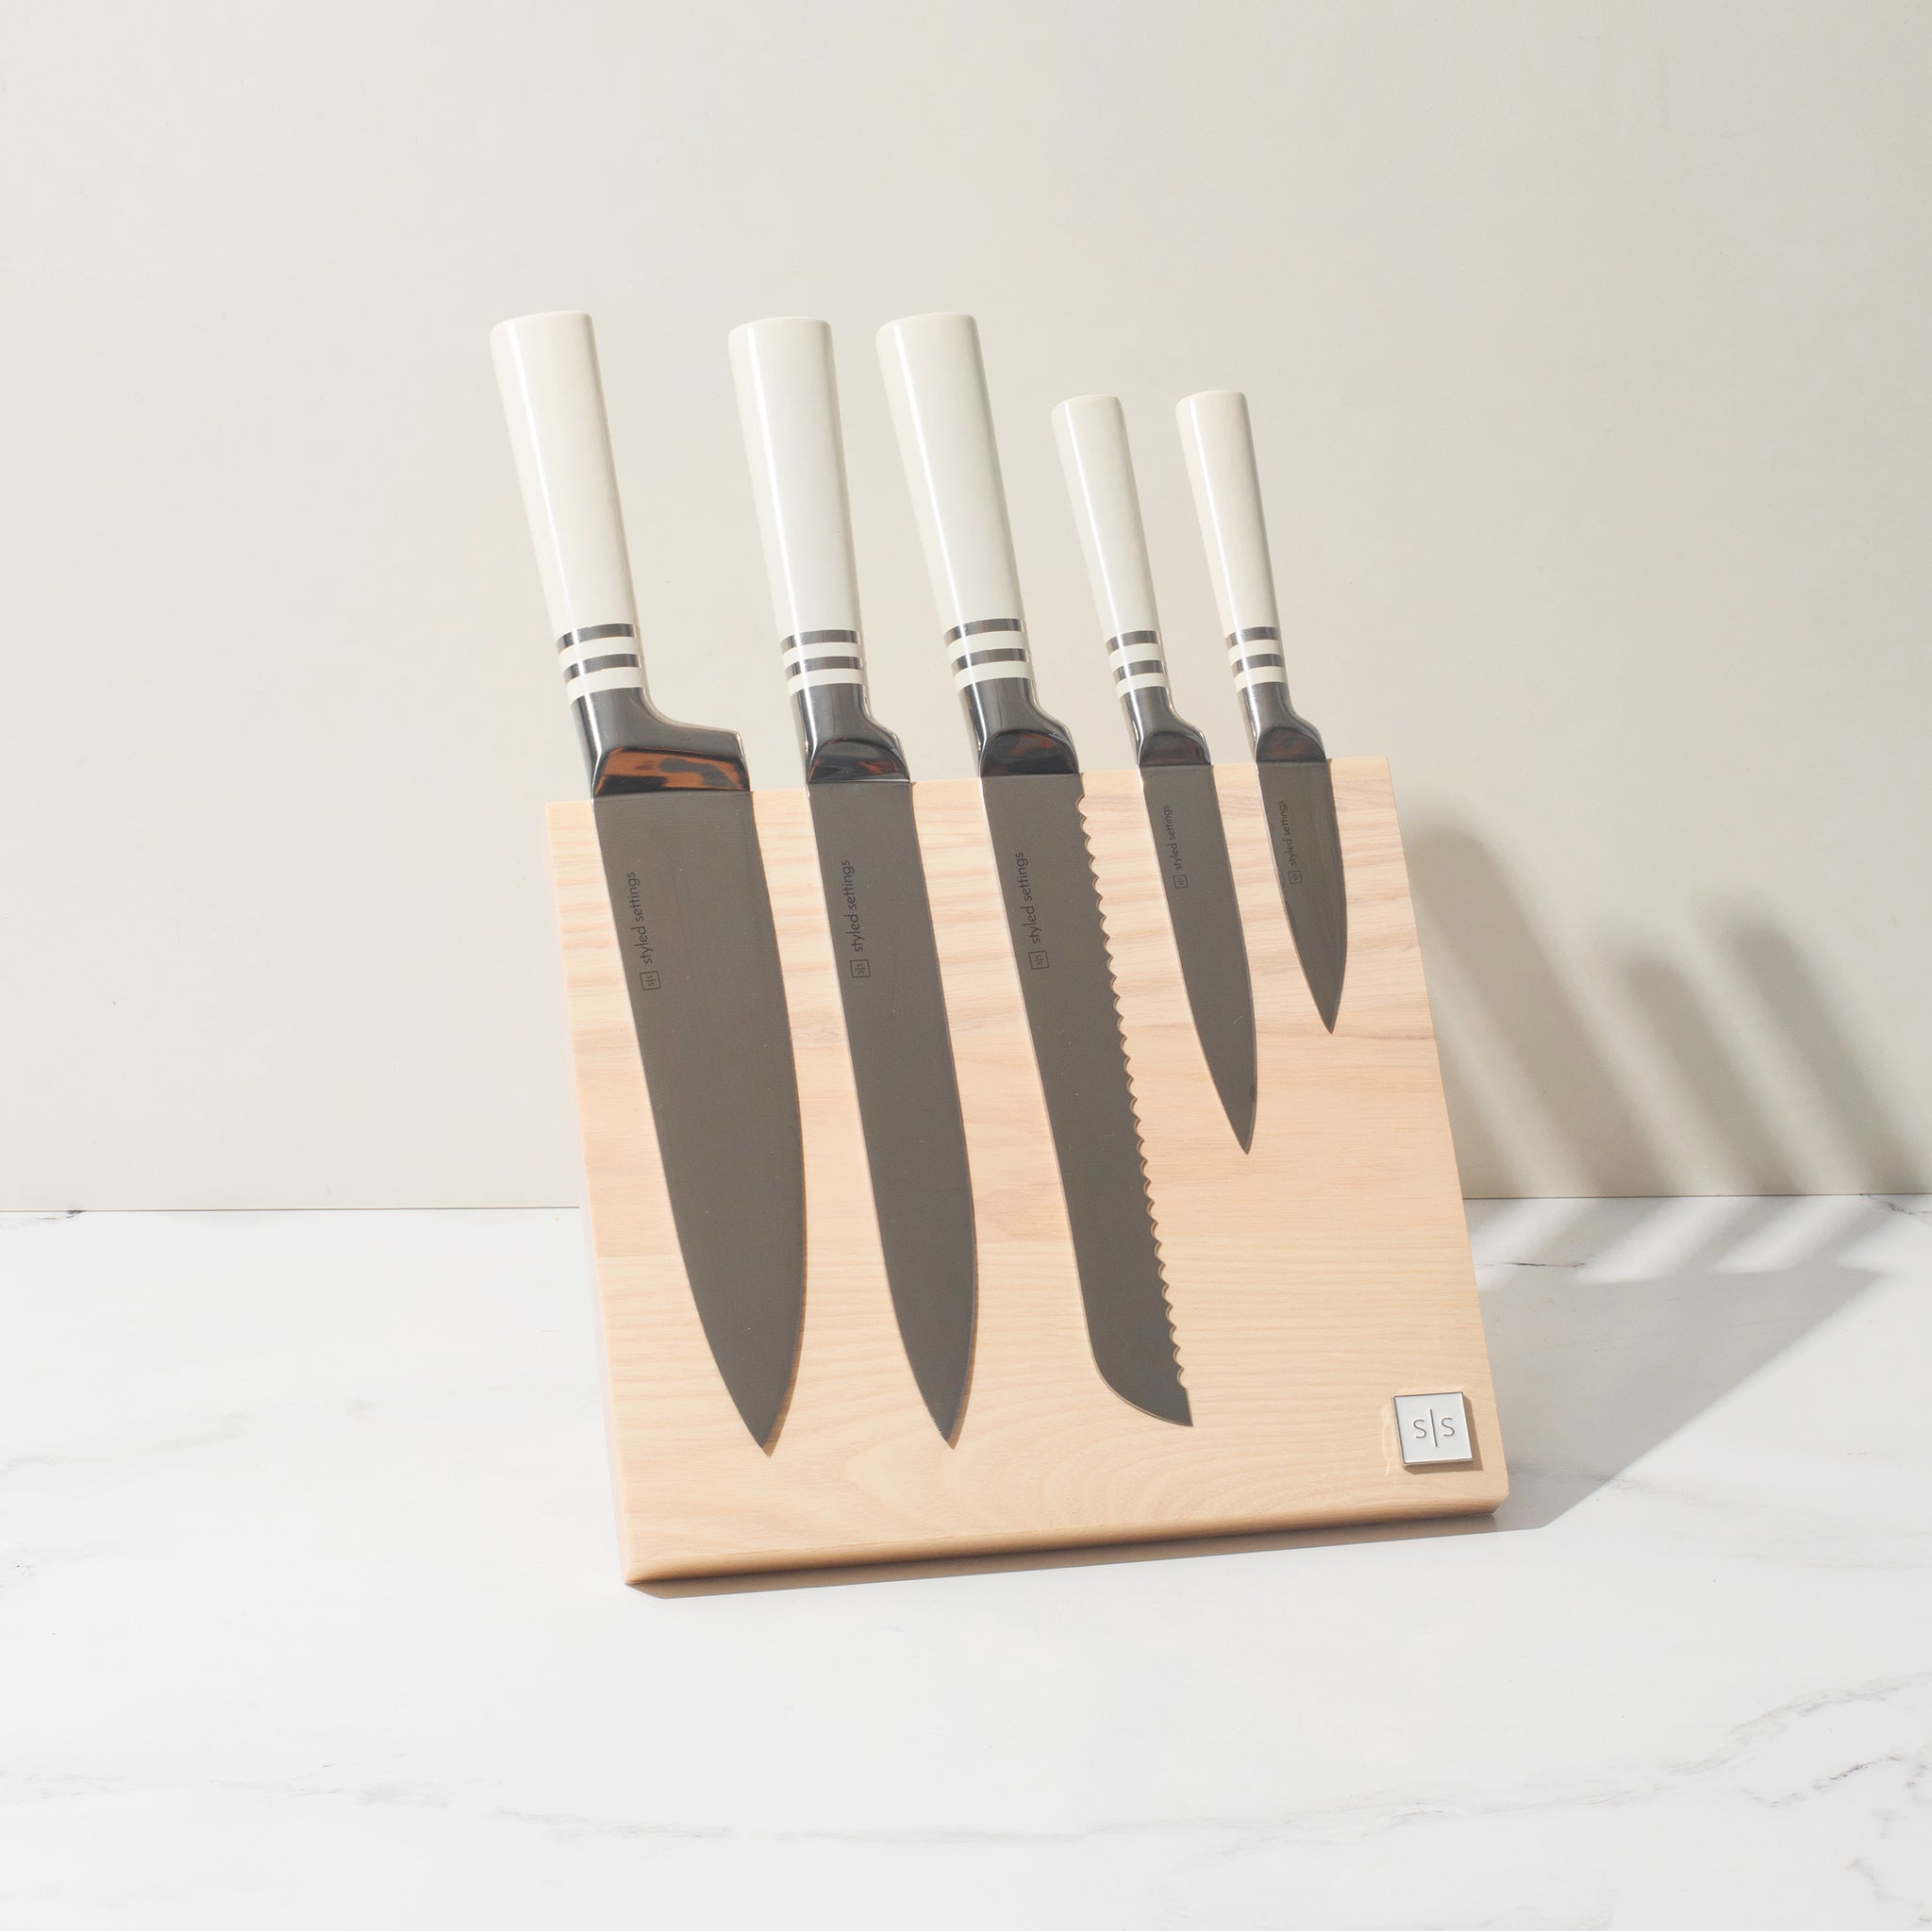  White Knife Set with Magnetic Knife Holder Stand - 6